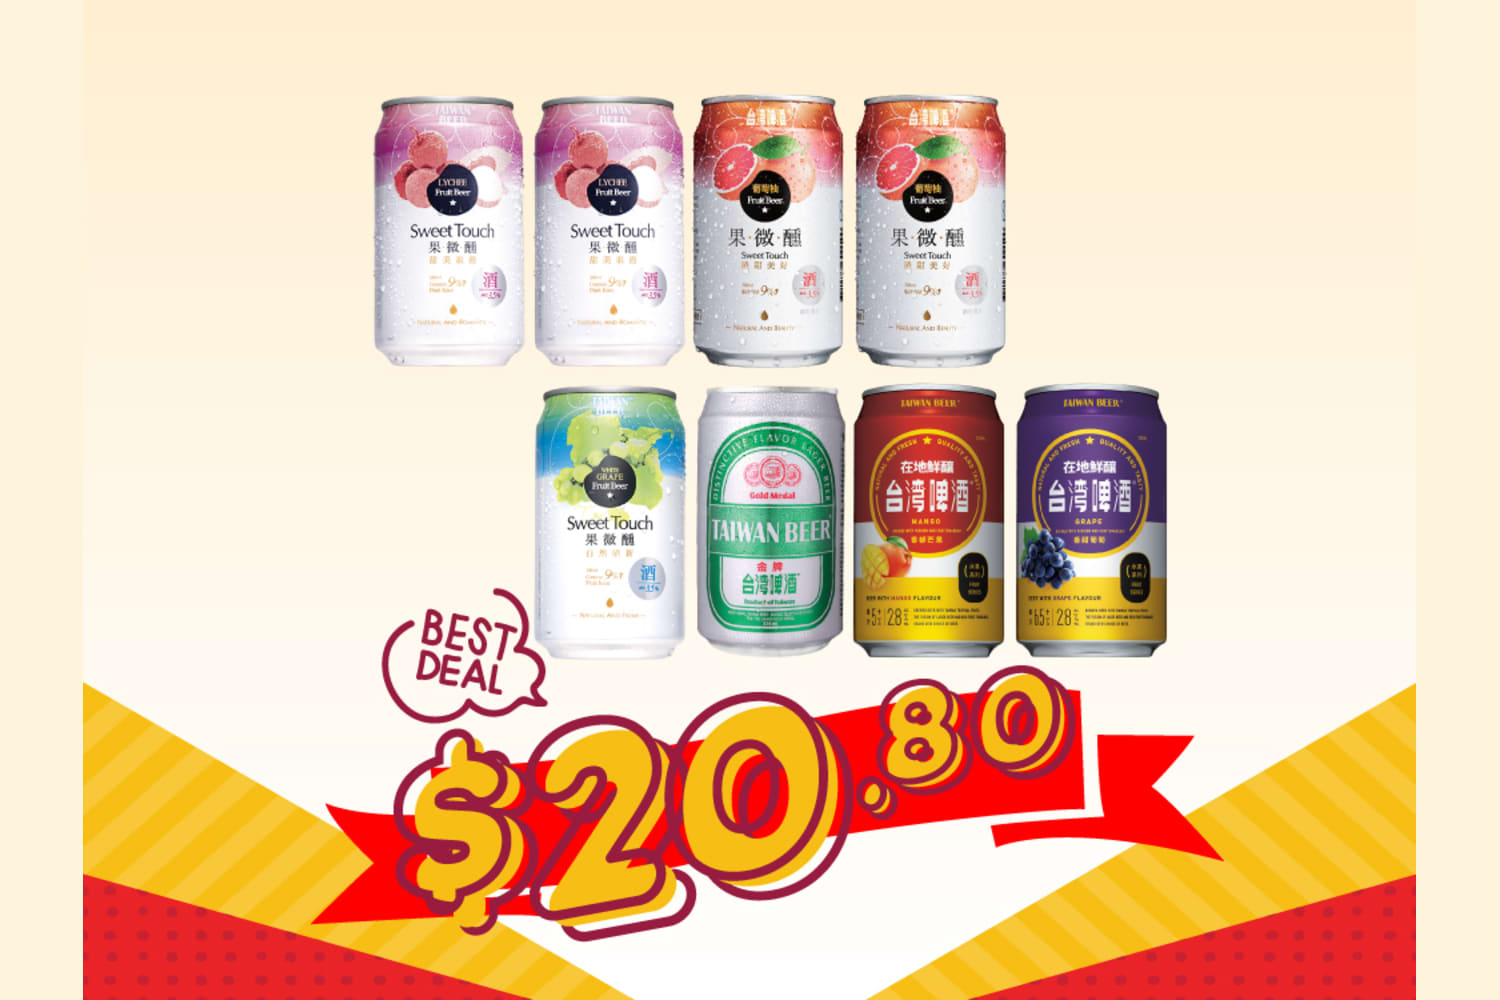 8 x Assorted Taiwan Beer - limited stock